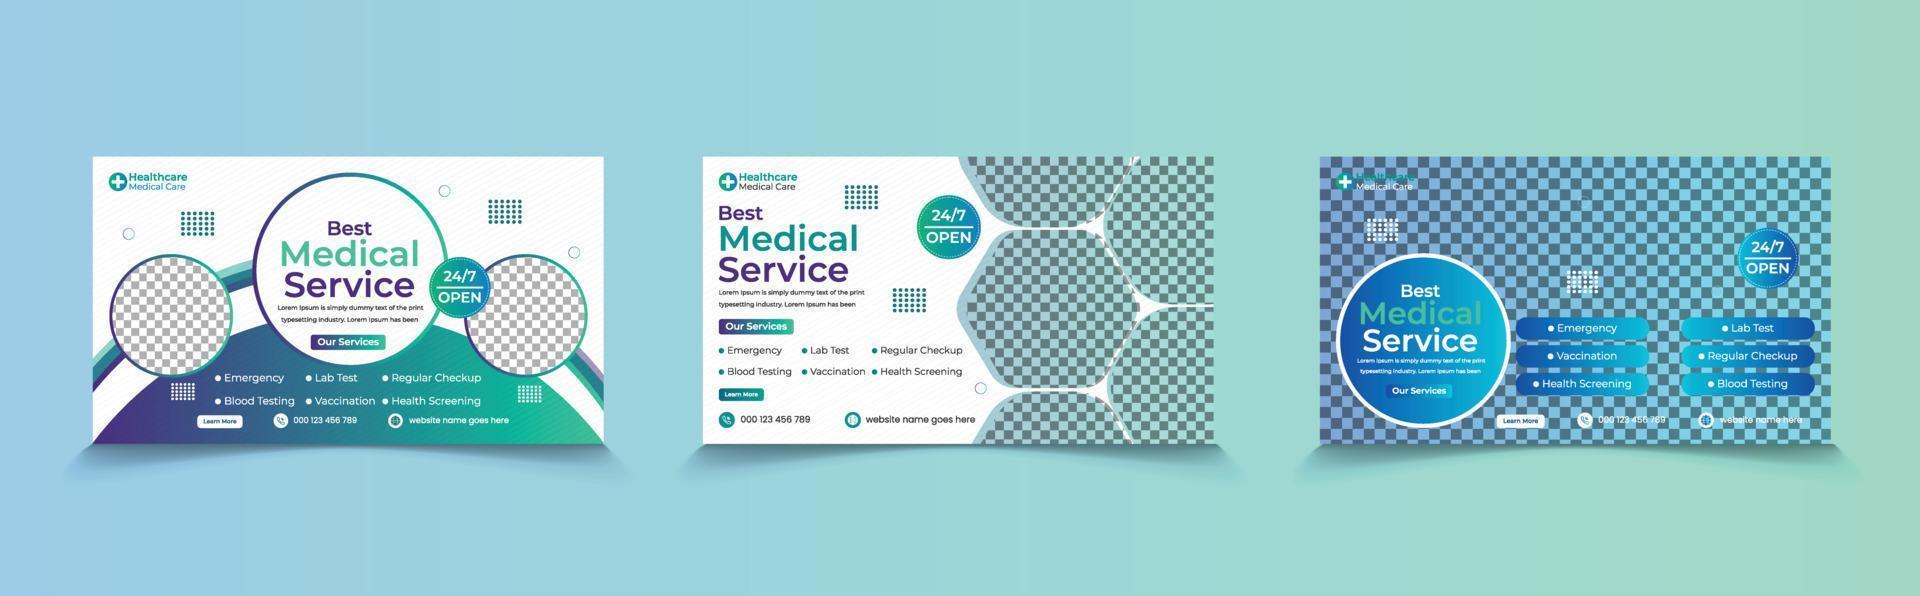 Best medical services web page banner and video thumbnail design template vector editable file, easy-to-clip image, text for ready to upload